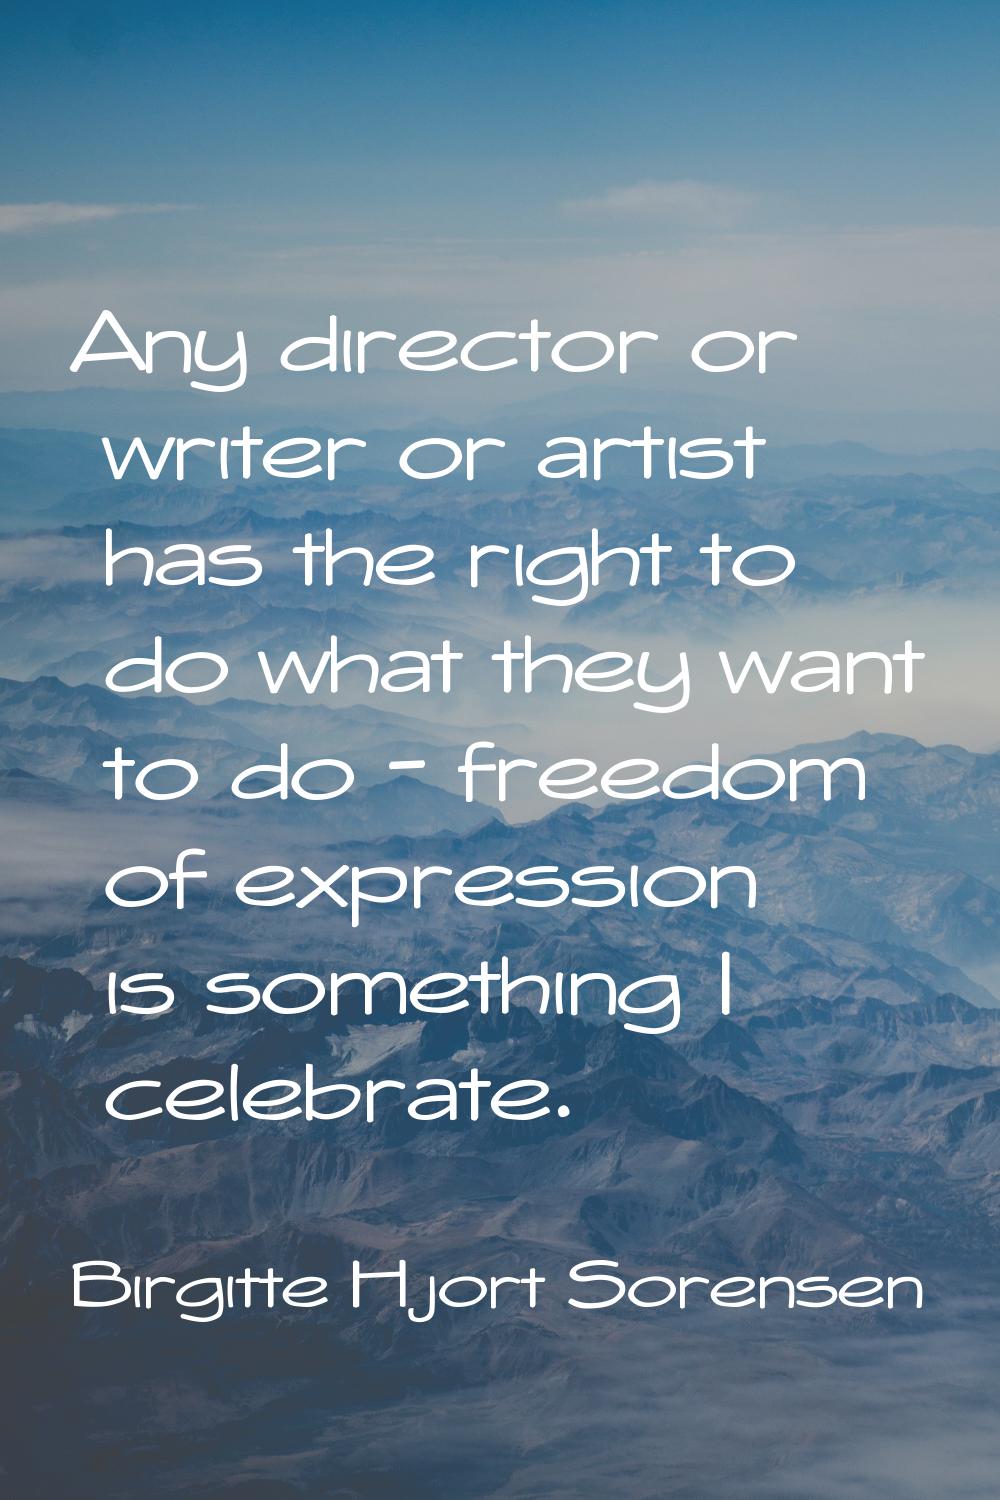 Any director or writer or artist has the right to do what they want to do - freedom of expression i